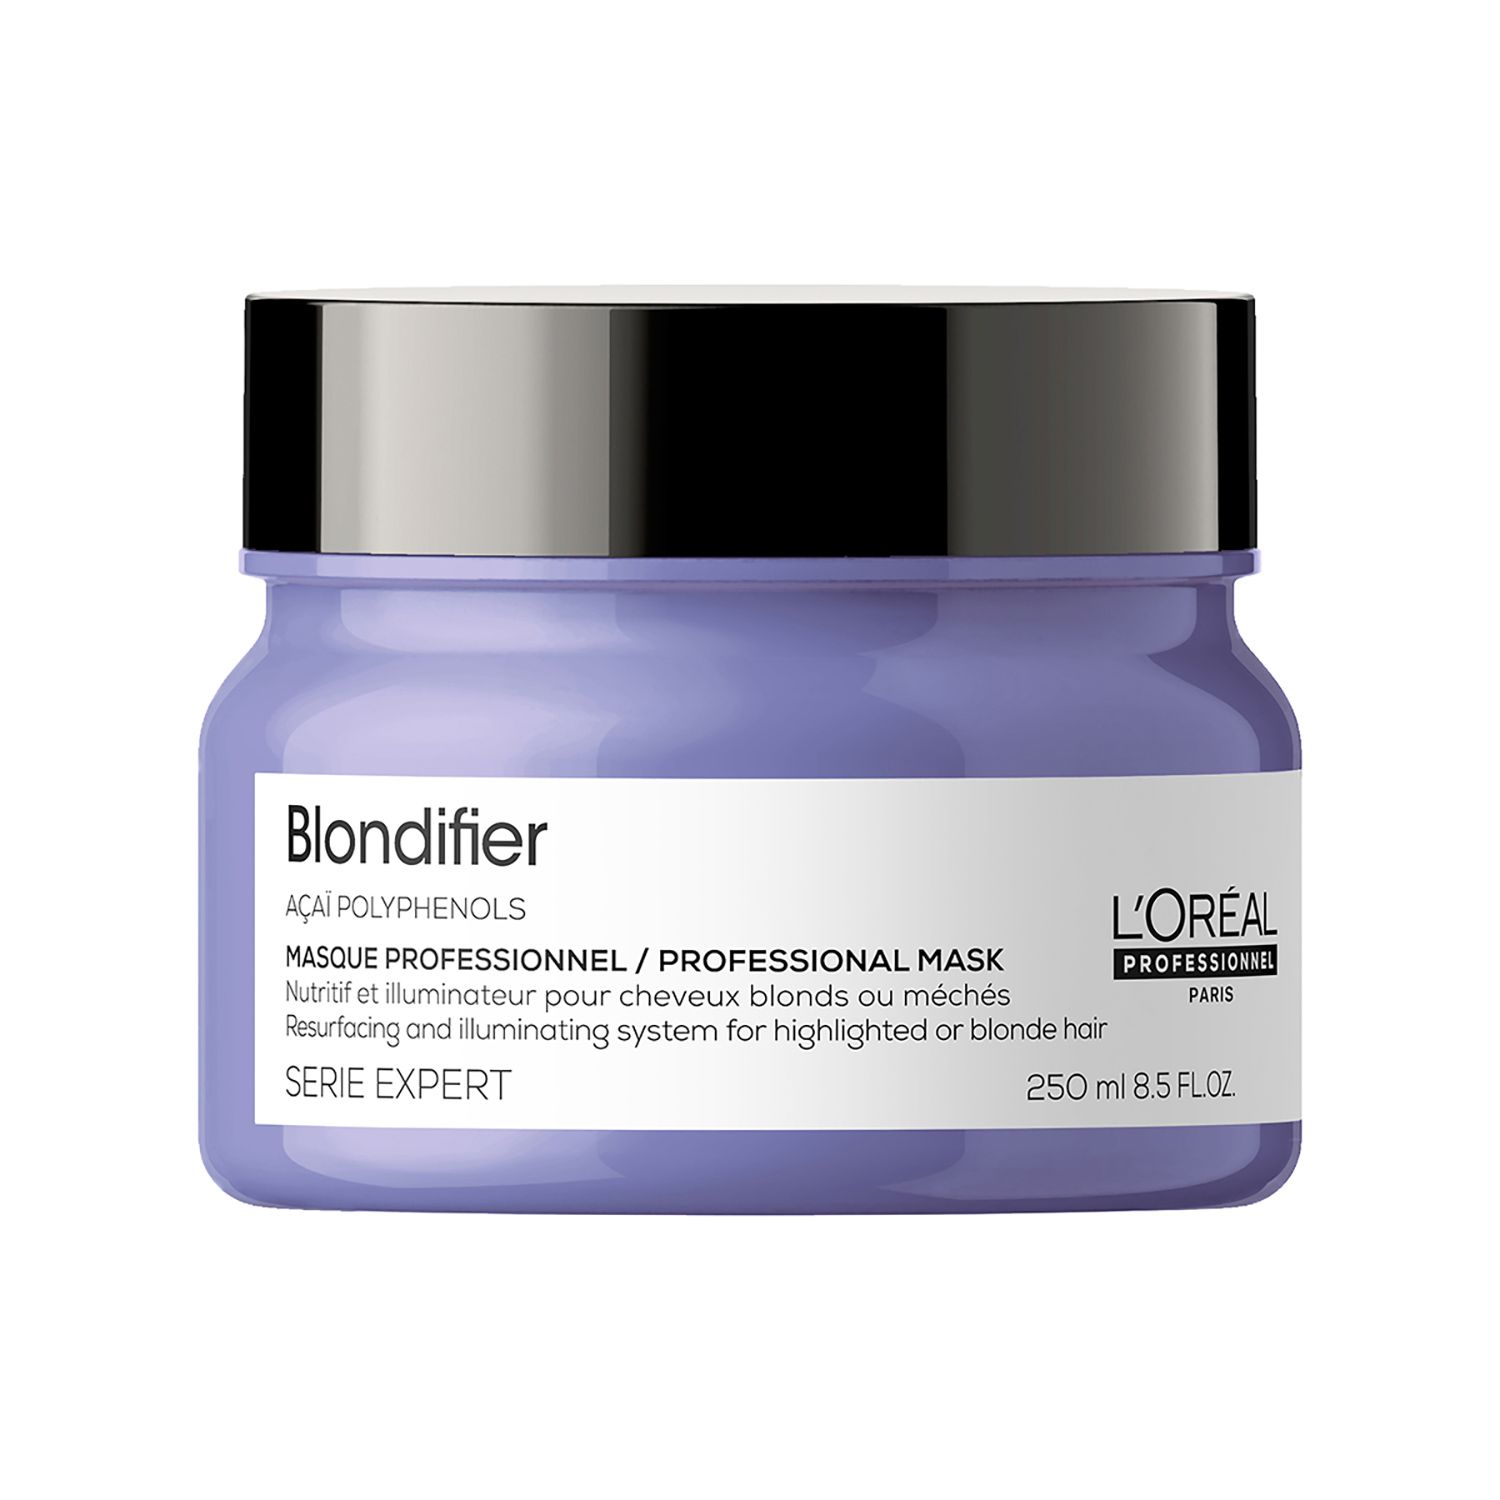 L’Oréal Professionnel Blondifier Mask for highlighted or blond hair SERIE EXPERT 250mL